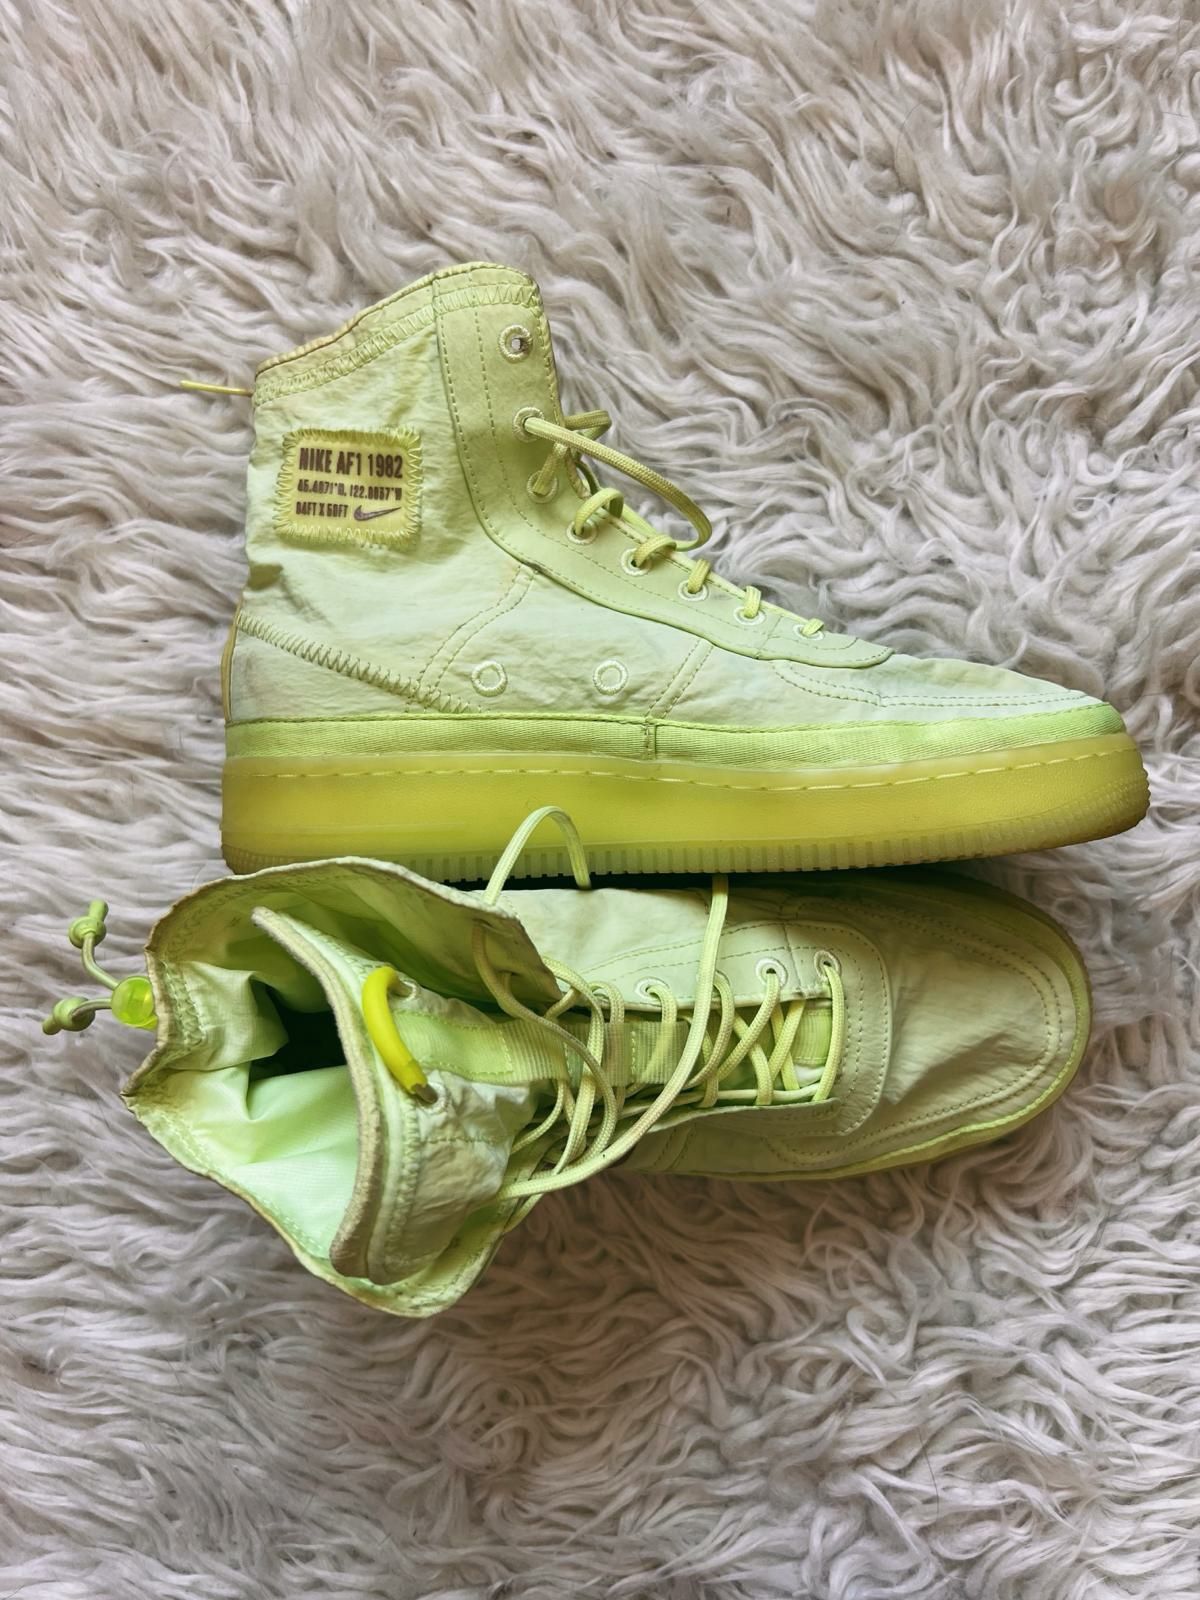 Nike air force 1 shell verde-neon